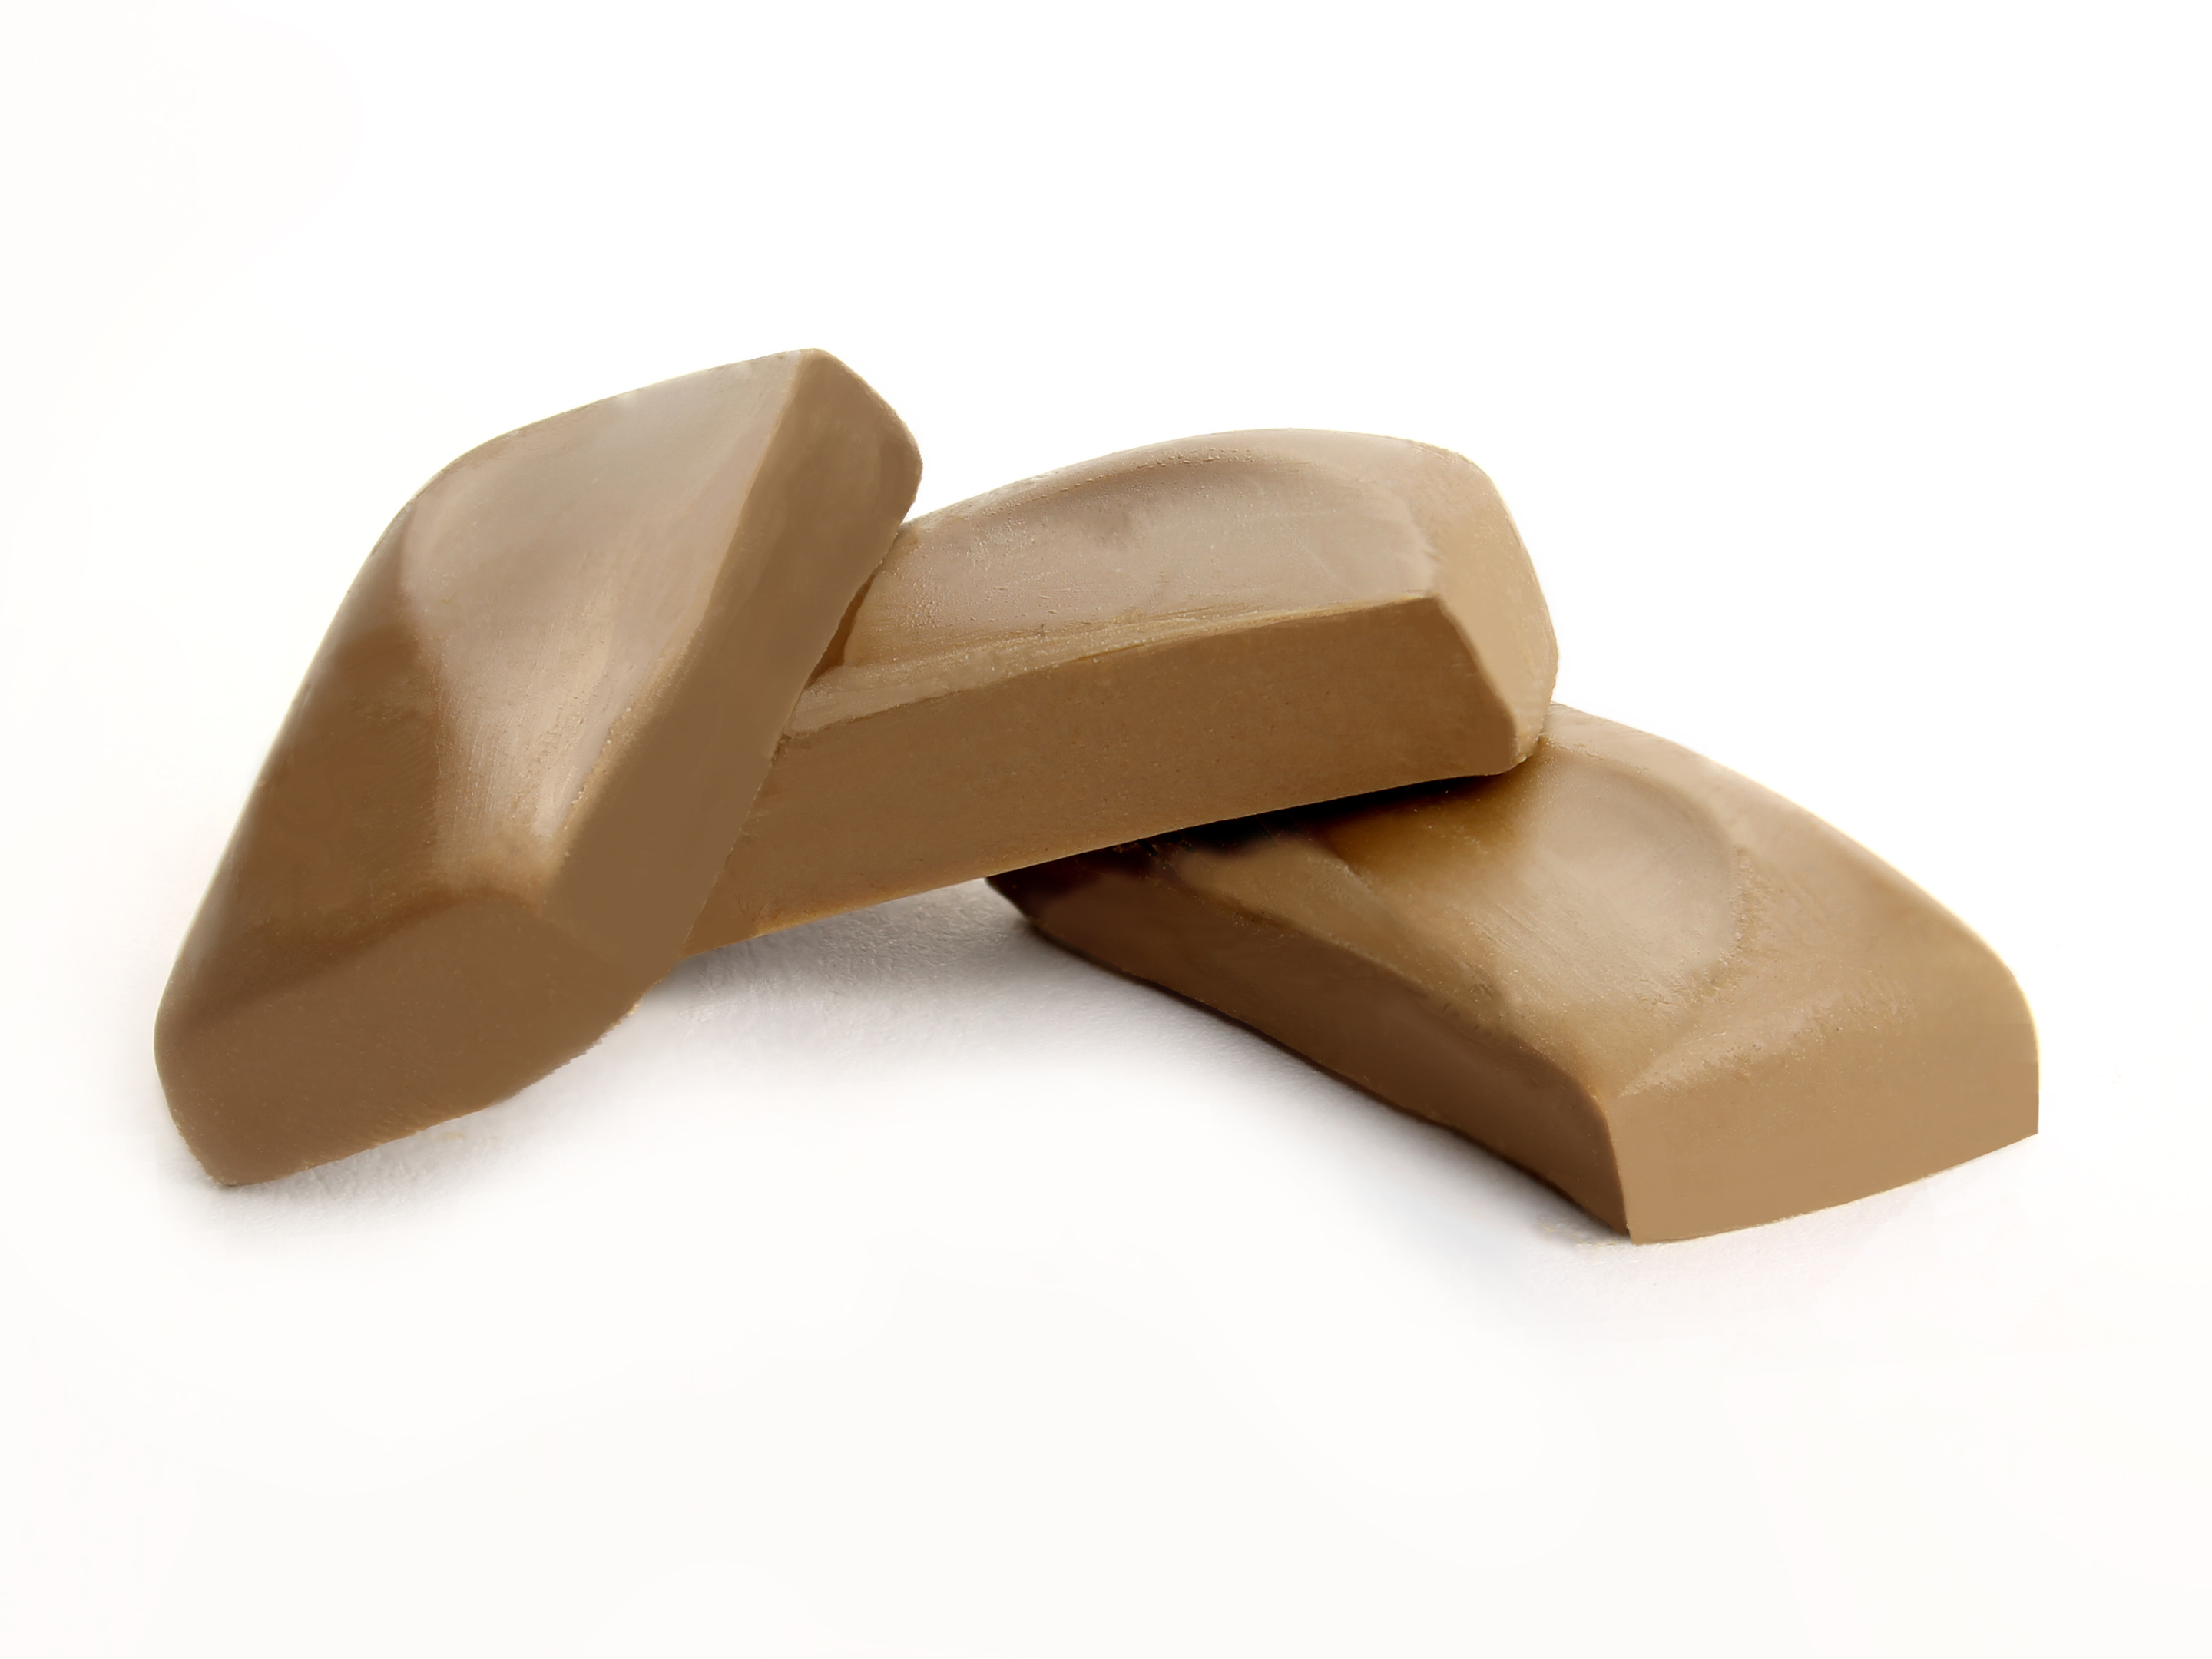 Some Galaxy chocolate has been recalled over salmonella fears (iStock)